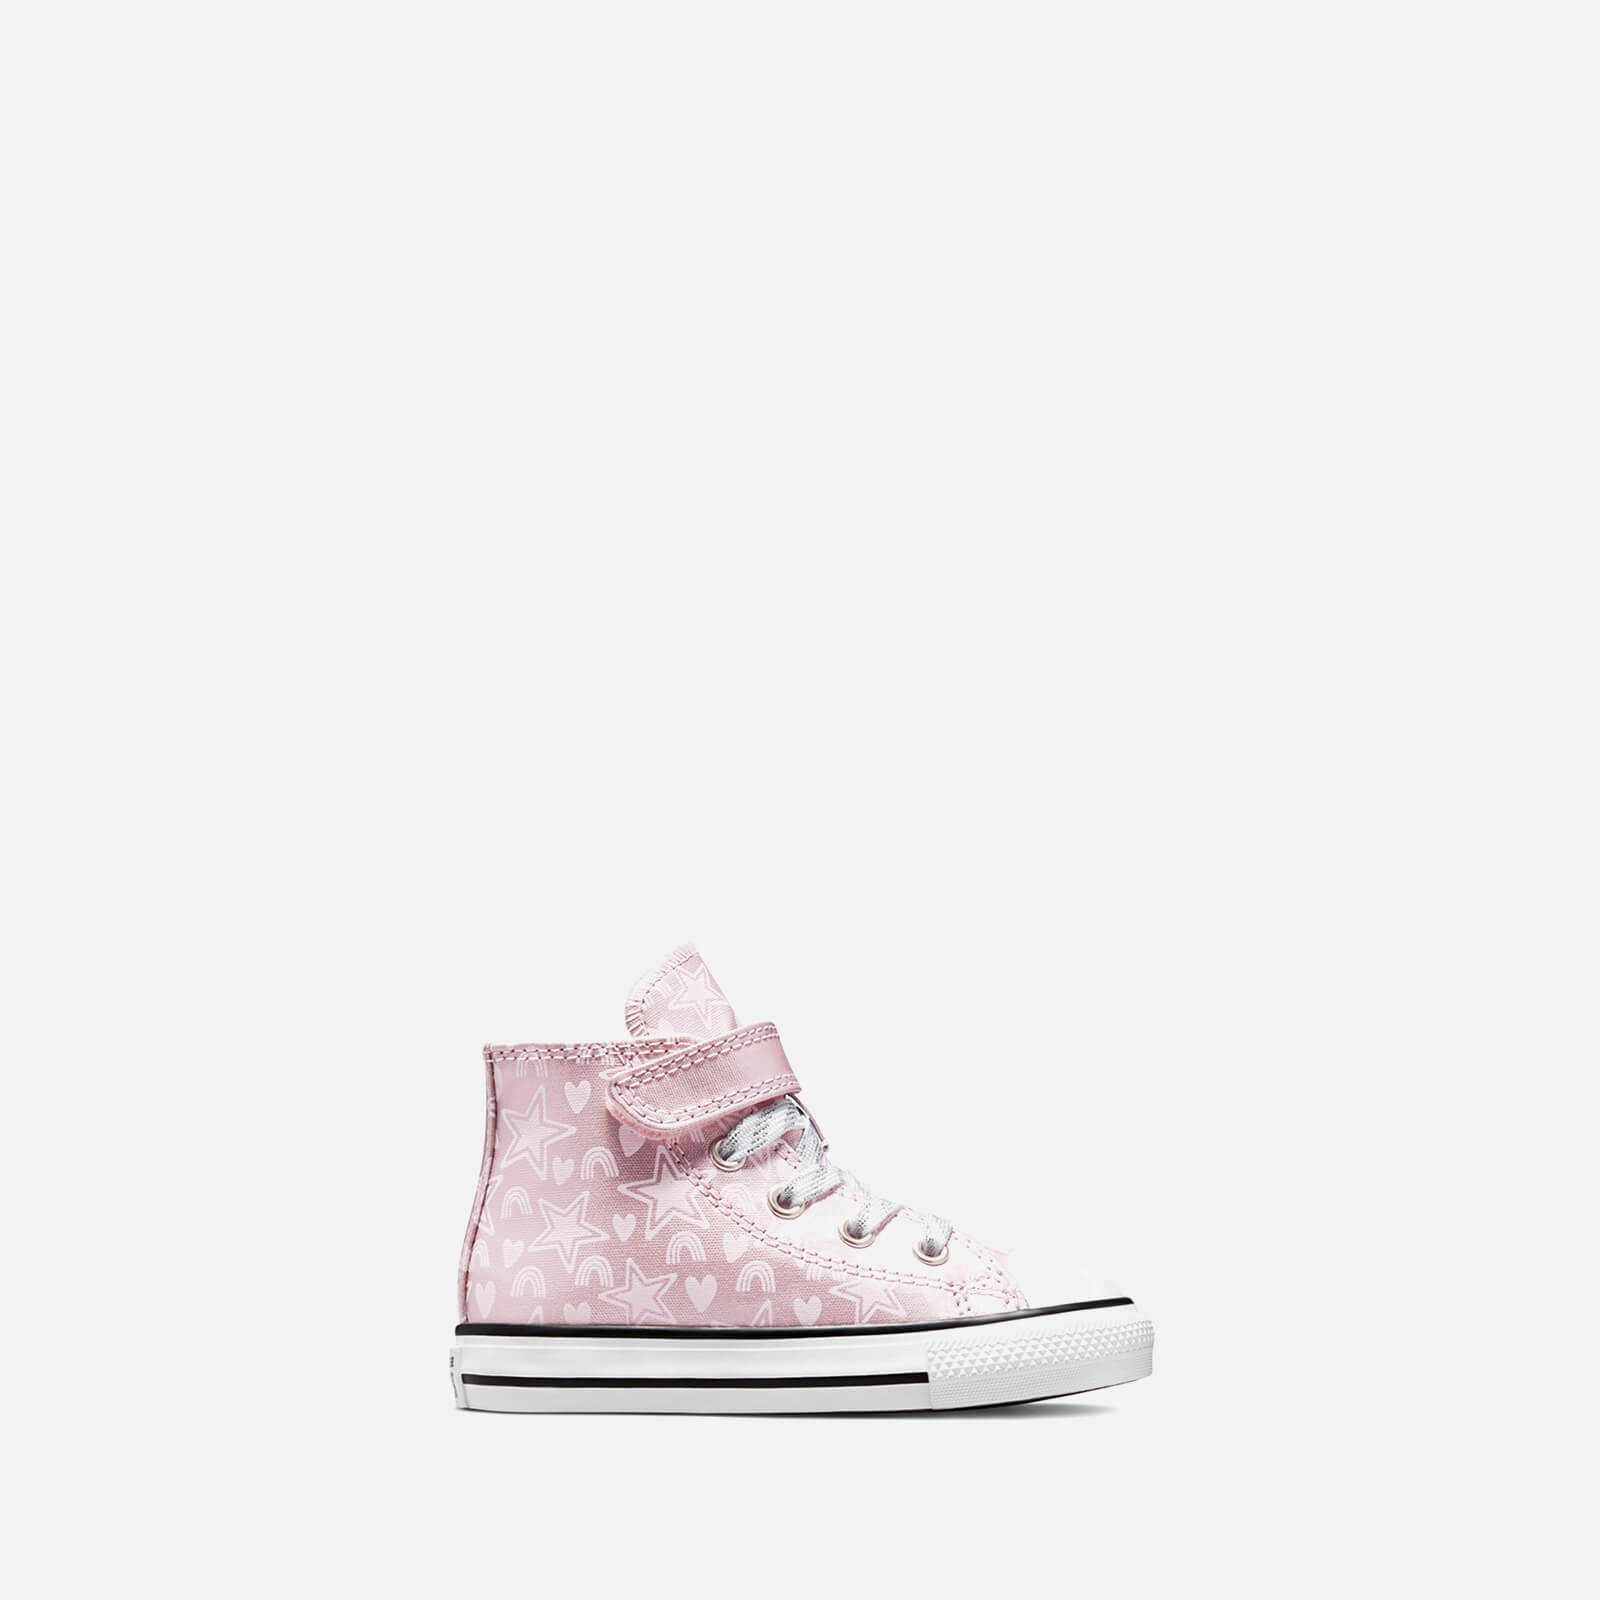 converse toddlers' chuck taylor all star 1v trainers - pink foam/egret/white - uk 8 toddler